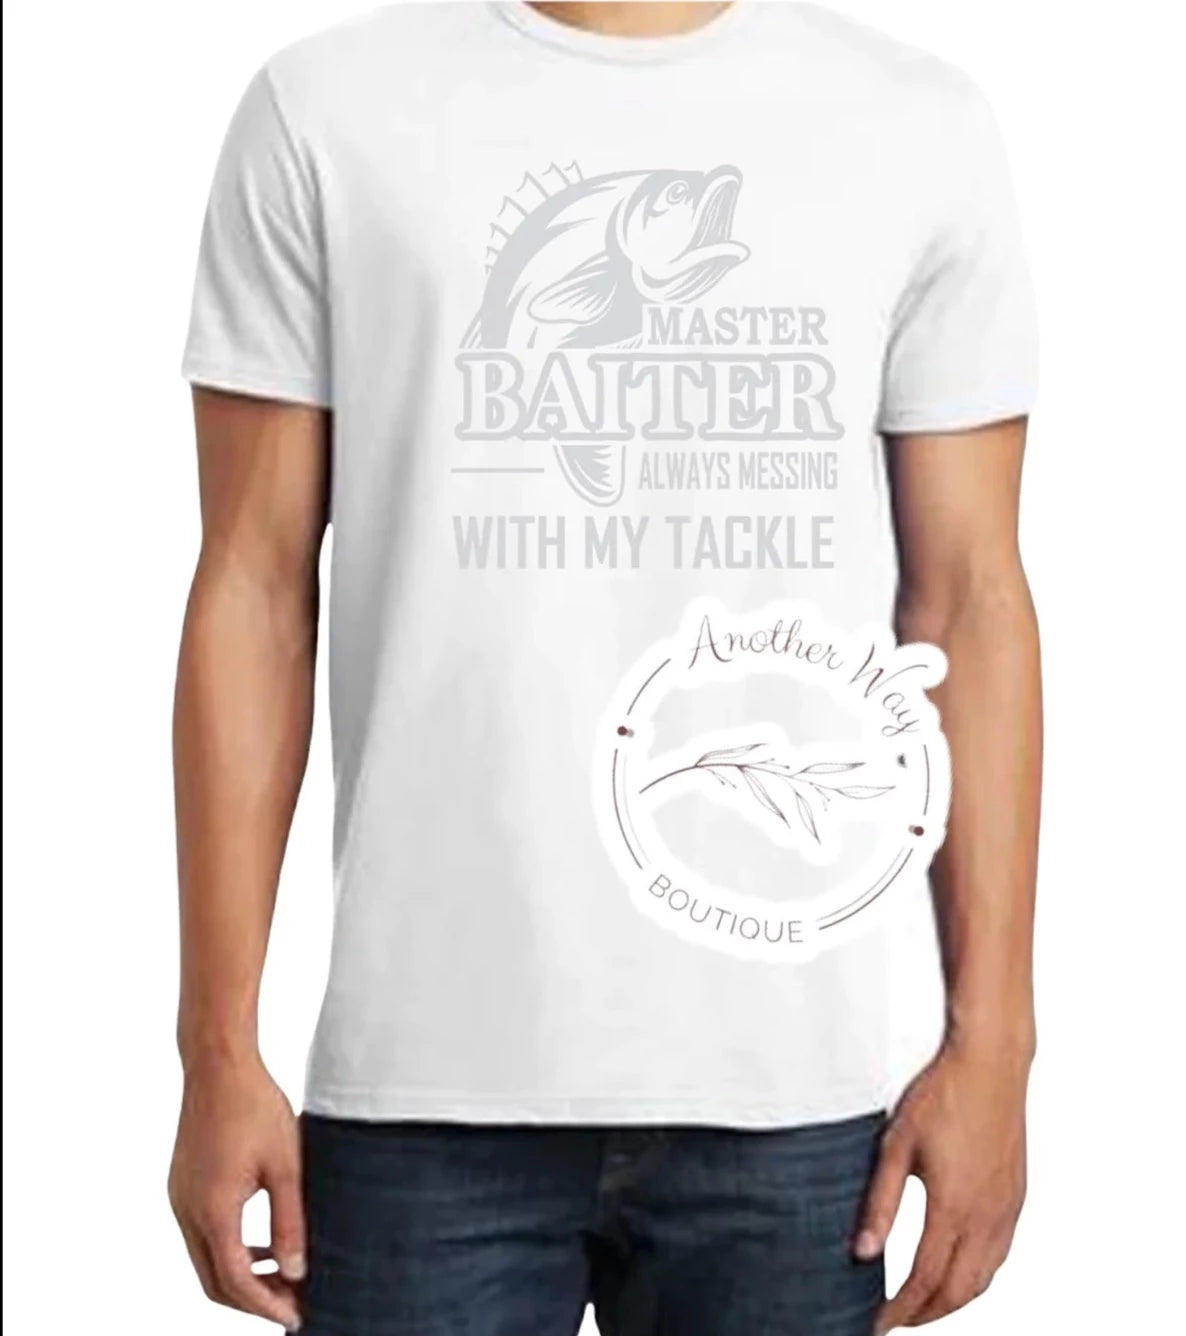 "Master Baiter Always Messing With My Tackle" - Another Way Boutique